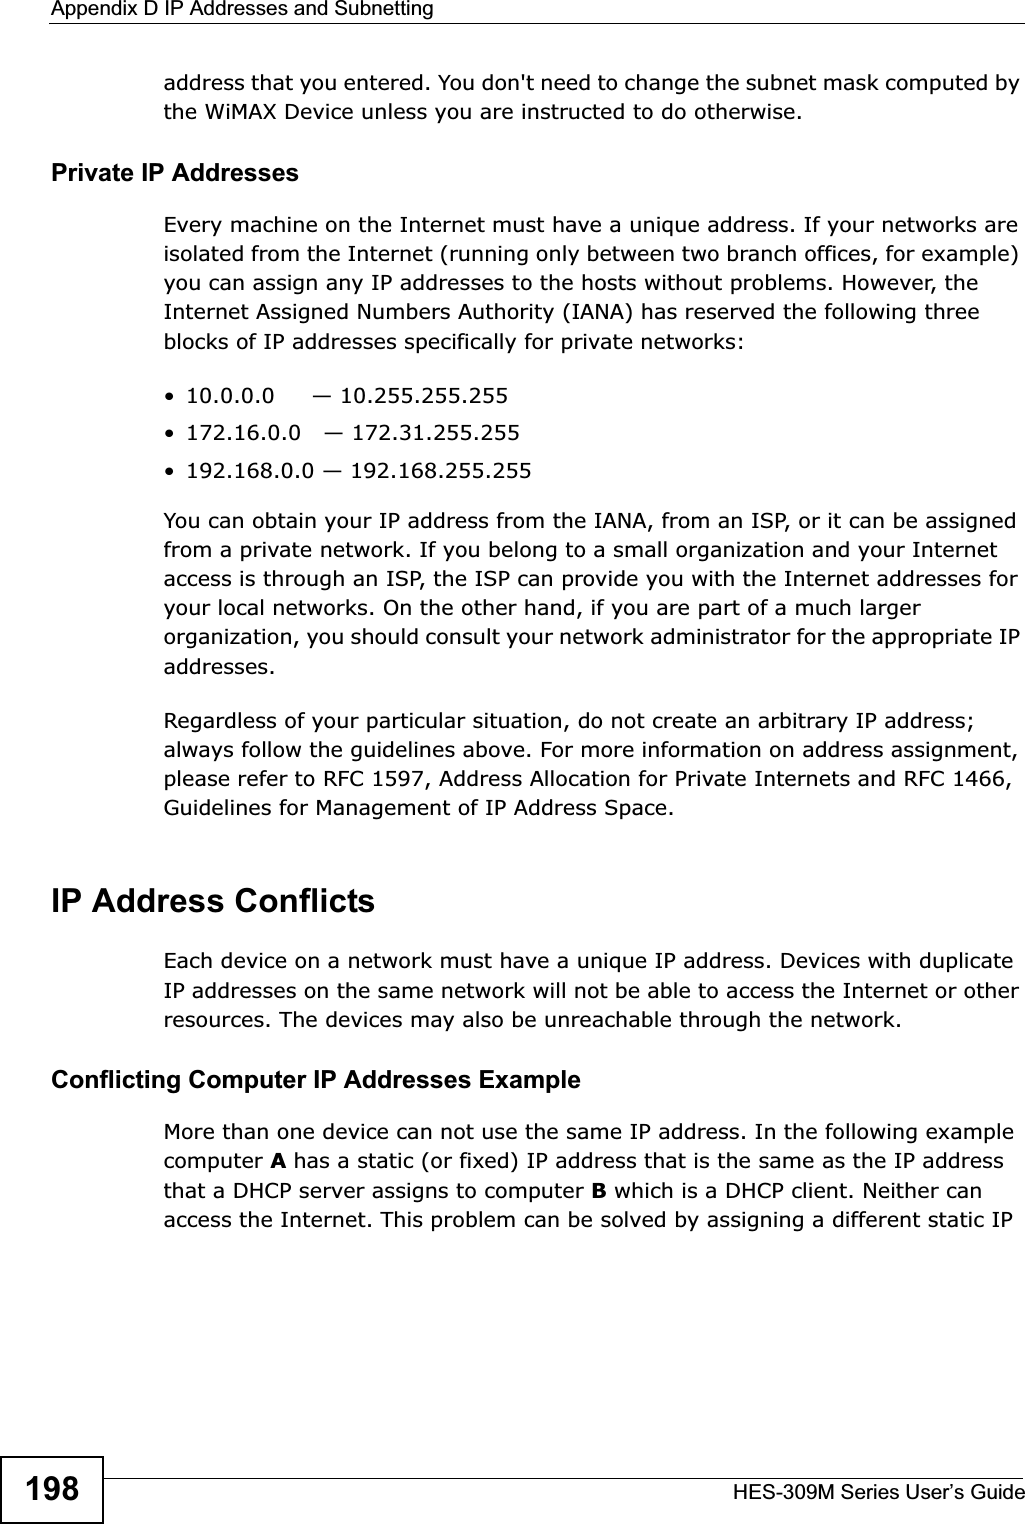 Appendix D IP Addresses and SubnettingHES-309M Series User’s Guide198address that you entered. You don&apos;t need to change the subnet mask computed by the WiMAX Device unless you are instructed to do otherwise.Private IP AddressesEvery machine on the Internet must have a unique address. If your networks are isolated from the Internet (running only between two branch offices, for example) you can assign any IP addresses to the hosts without problems. However, the Internet Assigned Numbers Authority (IANA) has reserved the following three blocks of IP addresses specifically for private networks:• 10.0.0.0     — 10.255.255.255• 172.16.0.0   — 172.31.255.255• 192.168.0.0 — 192.168.255.255You can obtain your IP address from the IANA, from an ISP, or it can be assigned from a private network. If you belong to a small organization and your Internet access is through an ISP, the ISP can provide you with the Internet addresses for your local networks. On the other hand, if you are part of a much larger organization, you should consult your network administrator for the appropriate IP addresses.Regardless of your particular situation, do not create an arbitrary IP address; always follow the guidelines above. For more information on address assignment, please refer to RFC 1597, Address Allocation for Private Internets and RFC 1466, Guidelines for Management of IP Address Space.IP Address ConflictsEach device on a network must have a unique IP address. Devices with duplicate IP addresses on the same network will not be able to access the Internet or other resources. The devices may also be unreachable through the network. Conflicting Computer IP Addresses ExampleMore than one device can not use the same IP address. In the following example computer Ahas a static (or fixed) IP address that is the same as the IP address that a DHCP server assigns to computer B which is a DHCP client. Neither can access the Internet. This problem can be solved by assigning a different static IP 